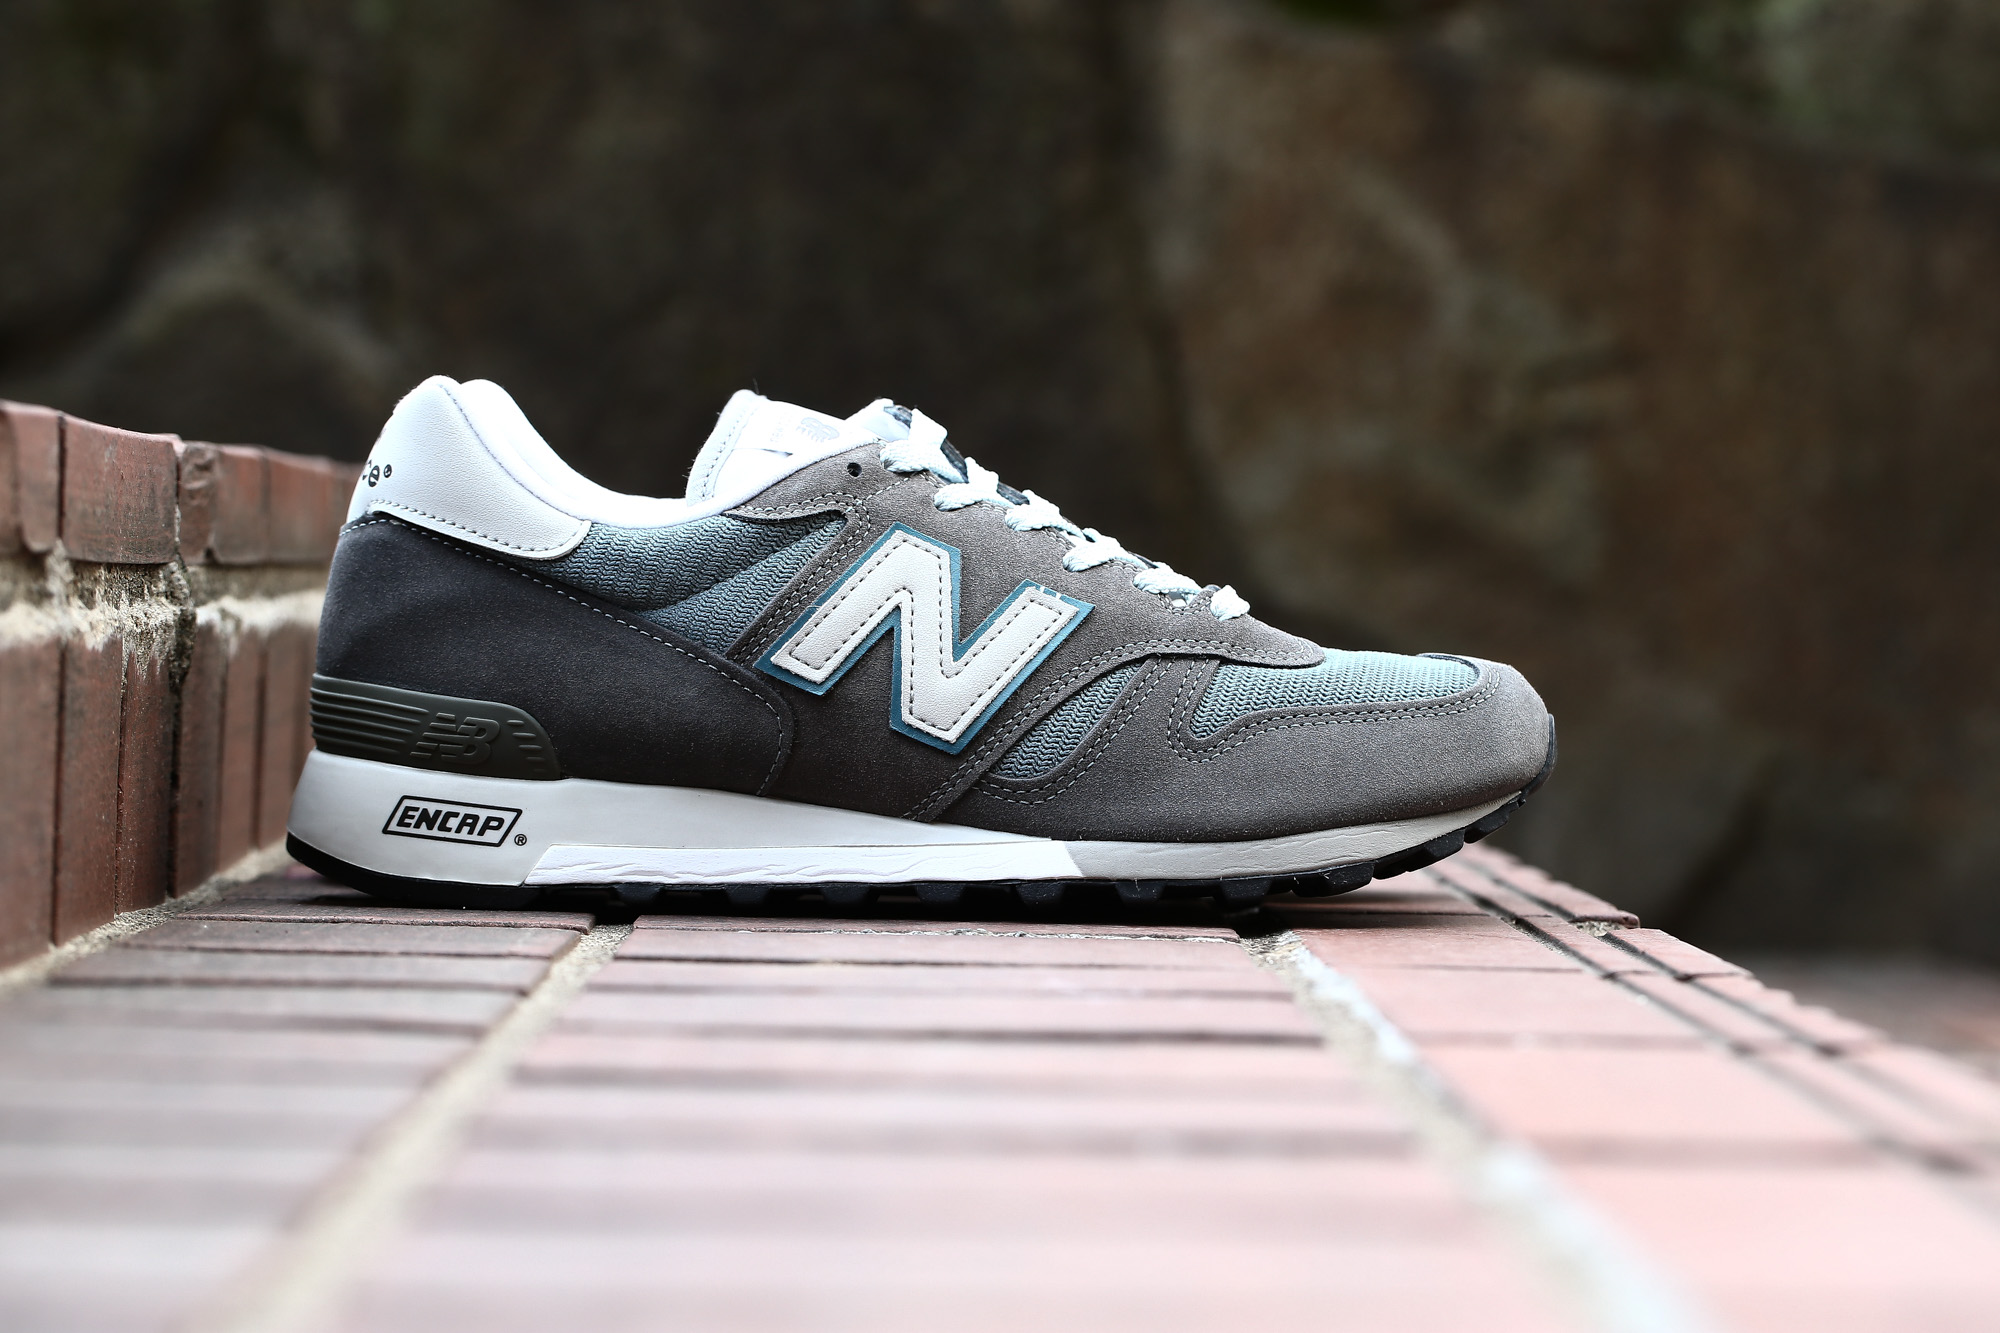 NEW BALANCE M1300CLS MADE IN U.S.A16万即決いかがでしょうか